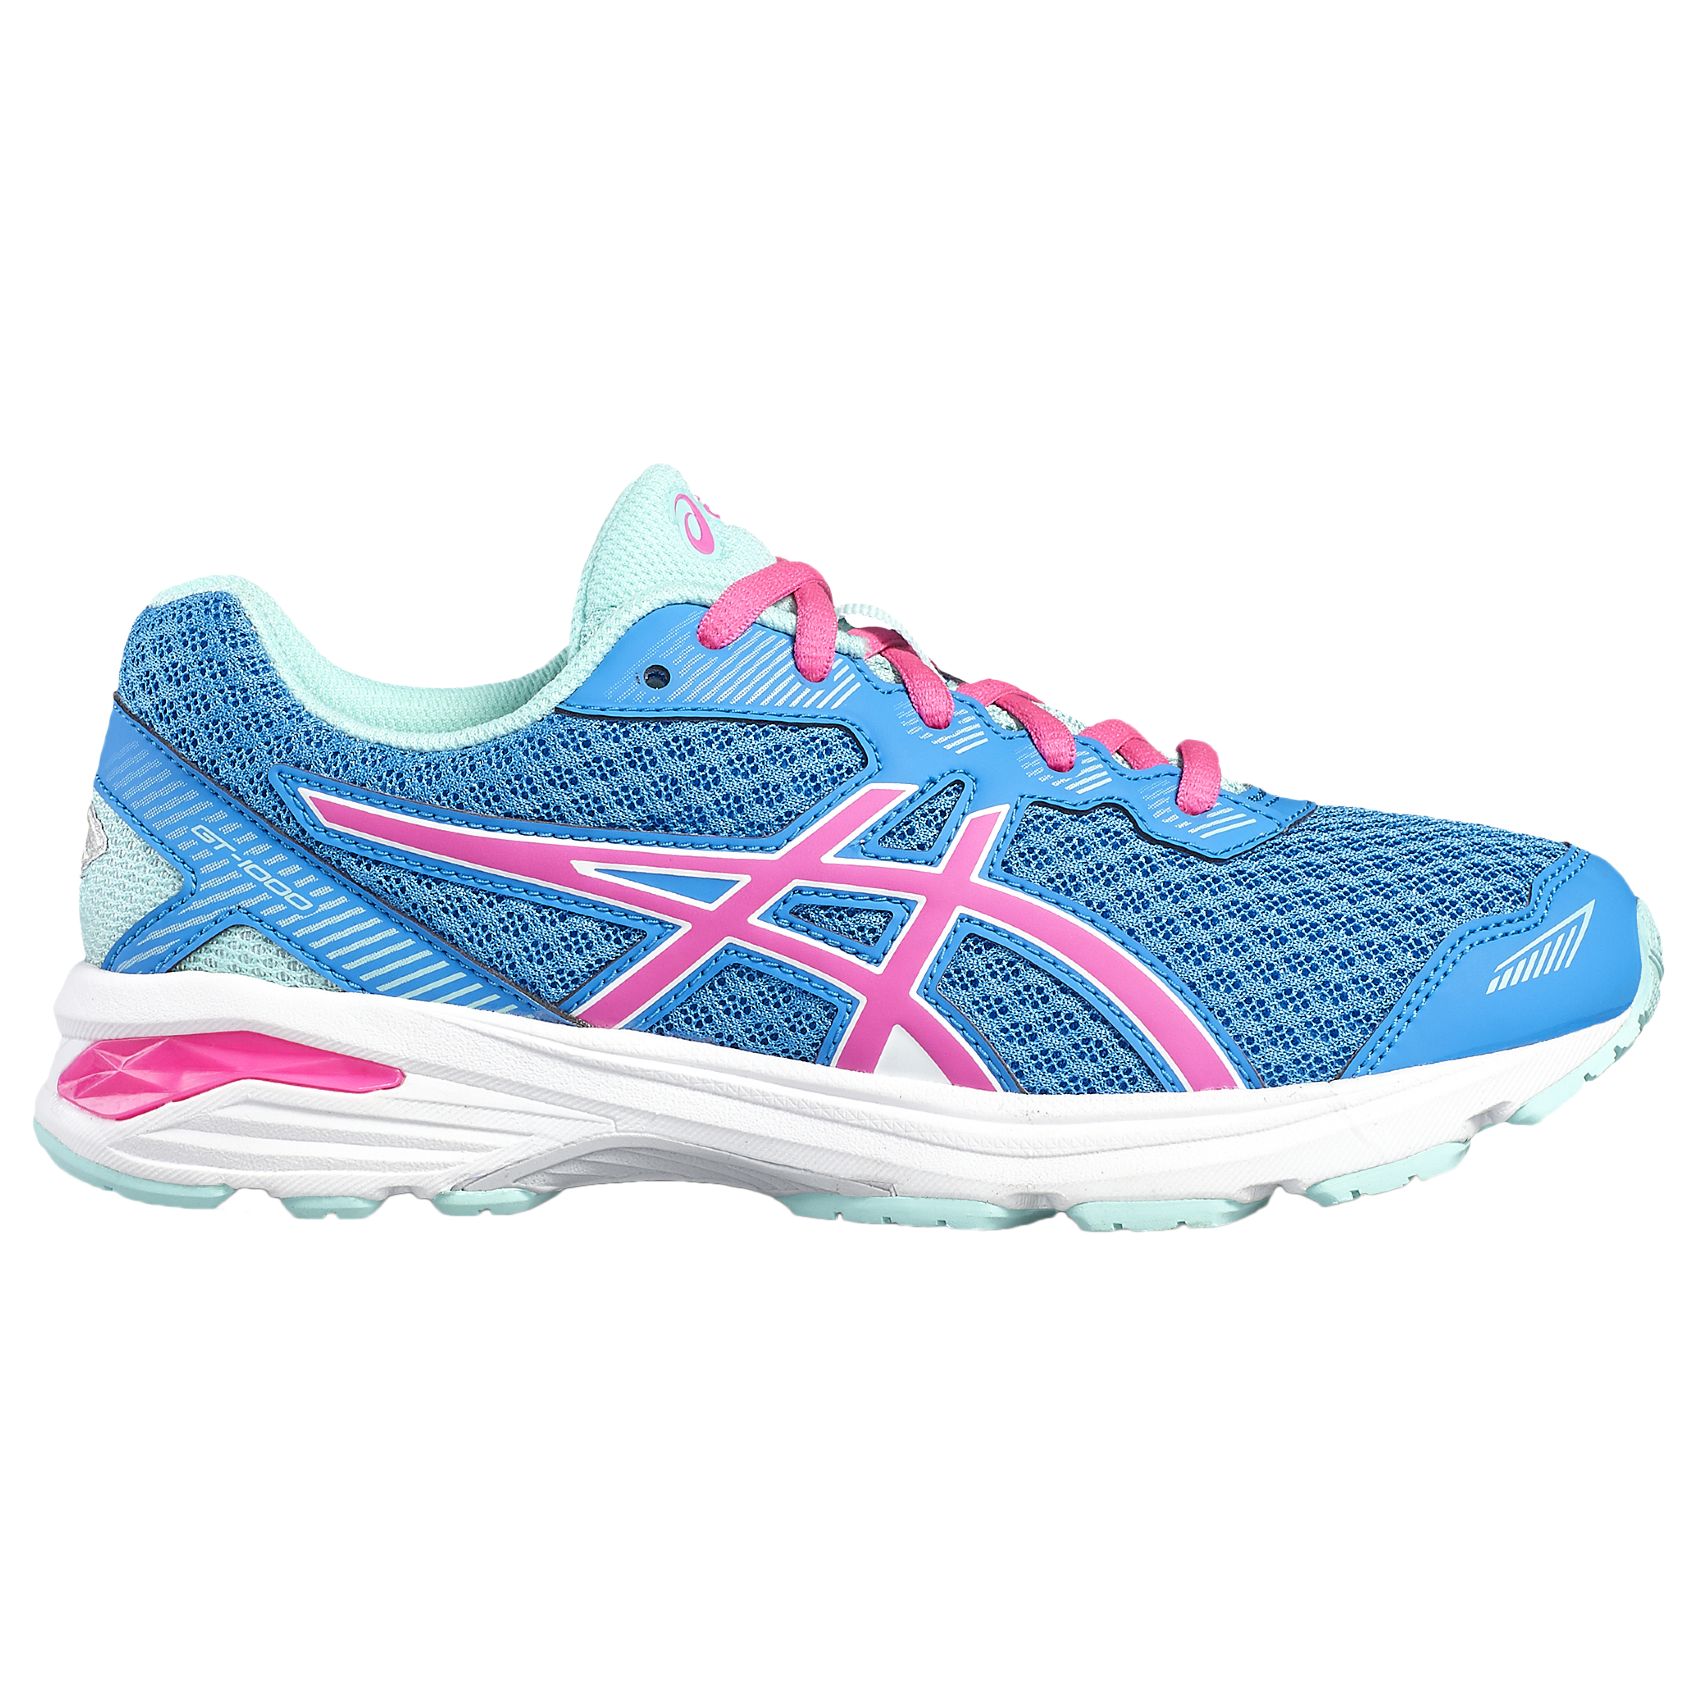 asics blue and pink trainers